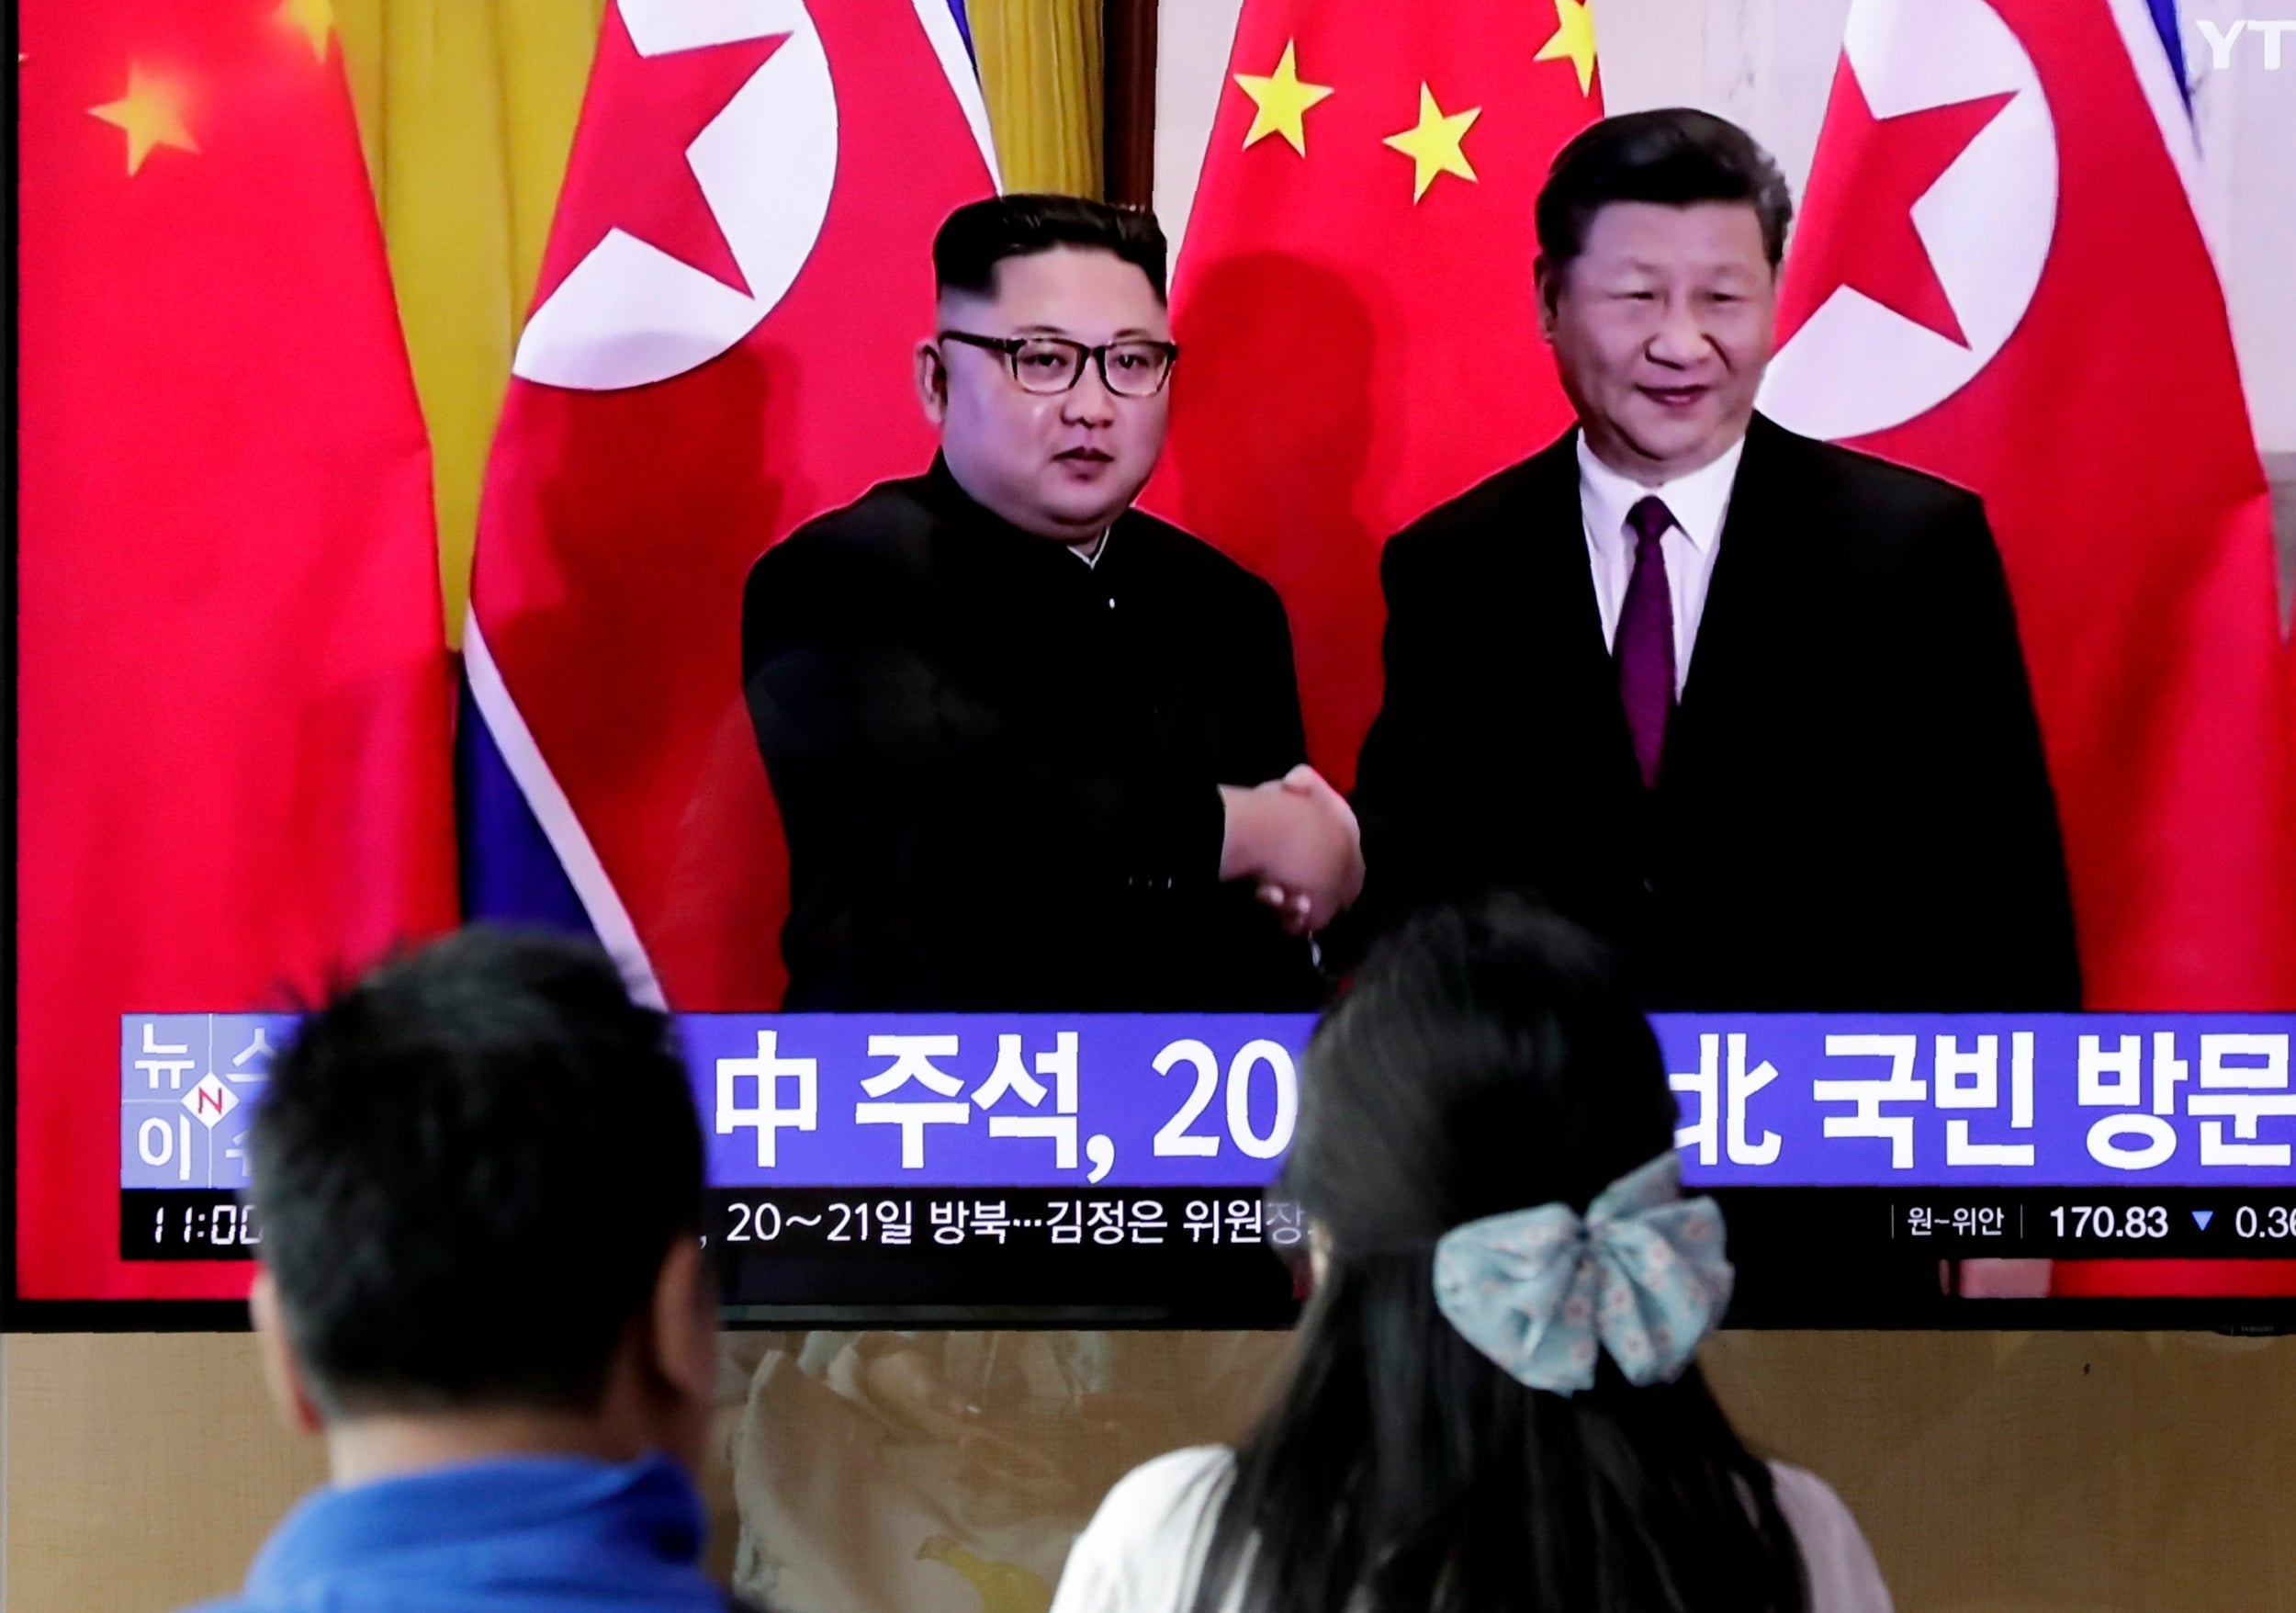 Members of public in Seoul watch reports of Chinese President Xi Jinping's imminent state visit to North Korea